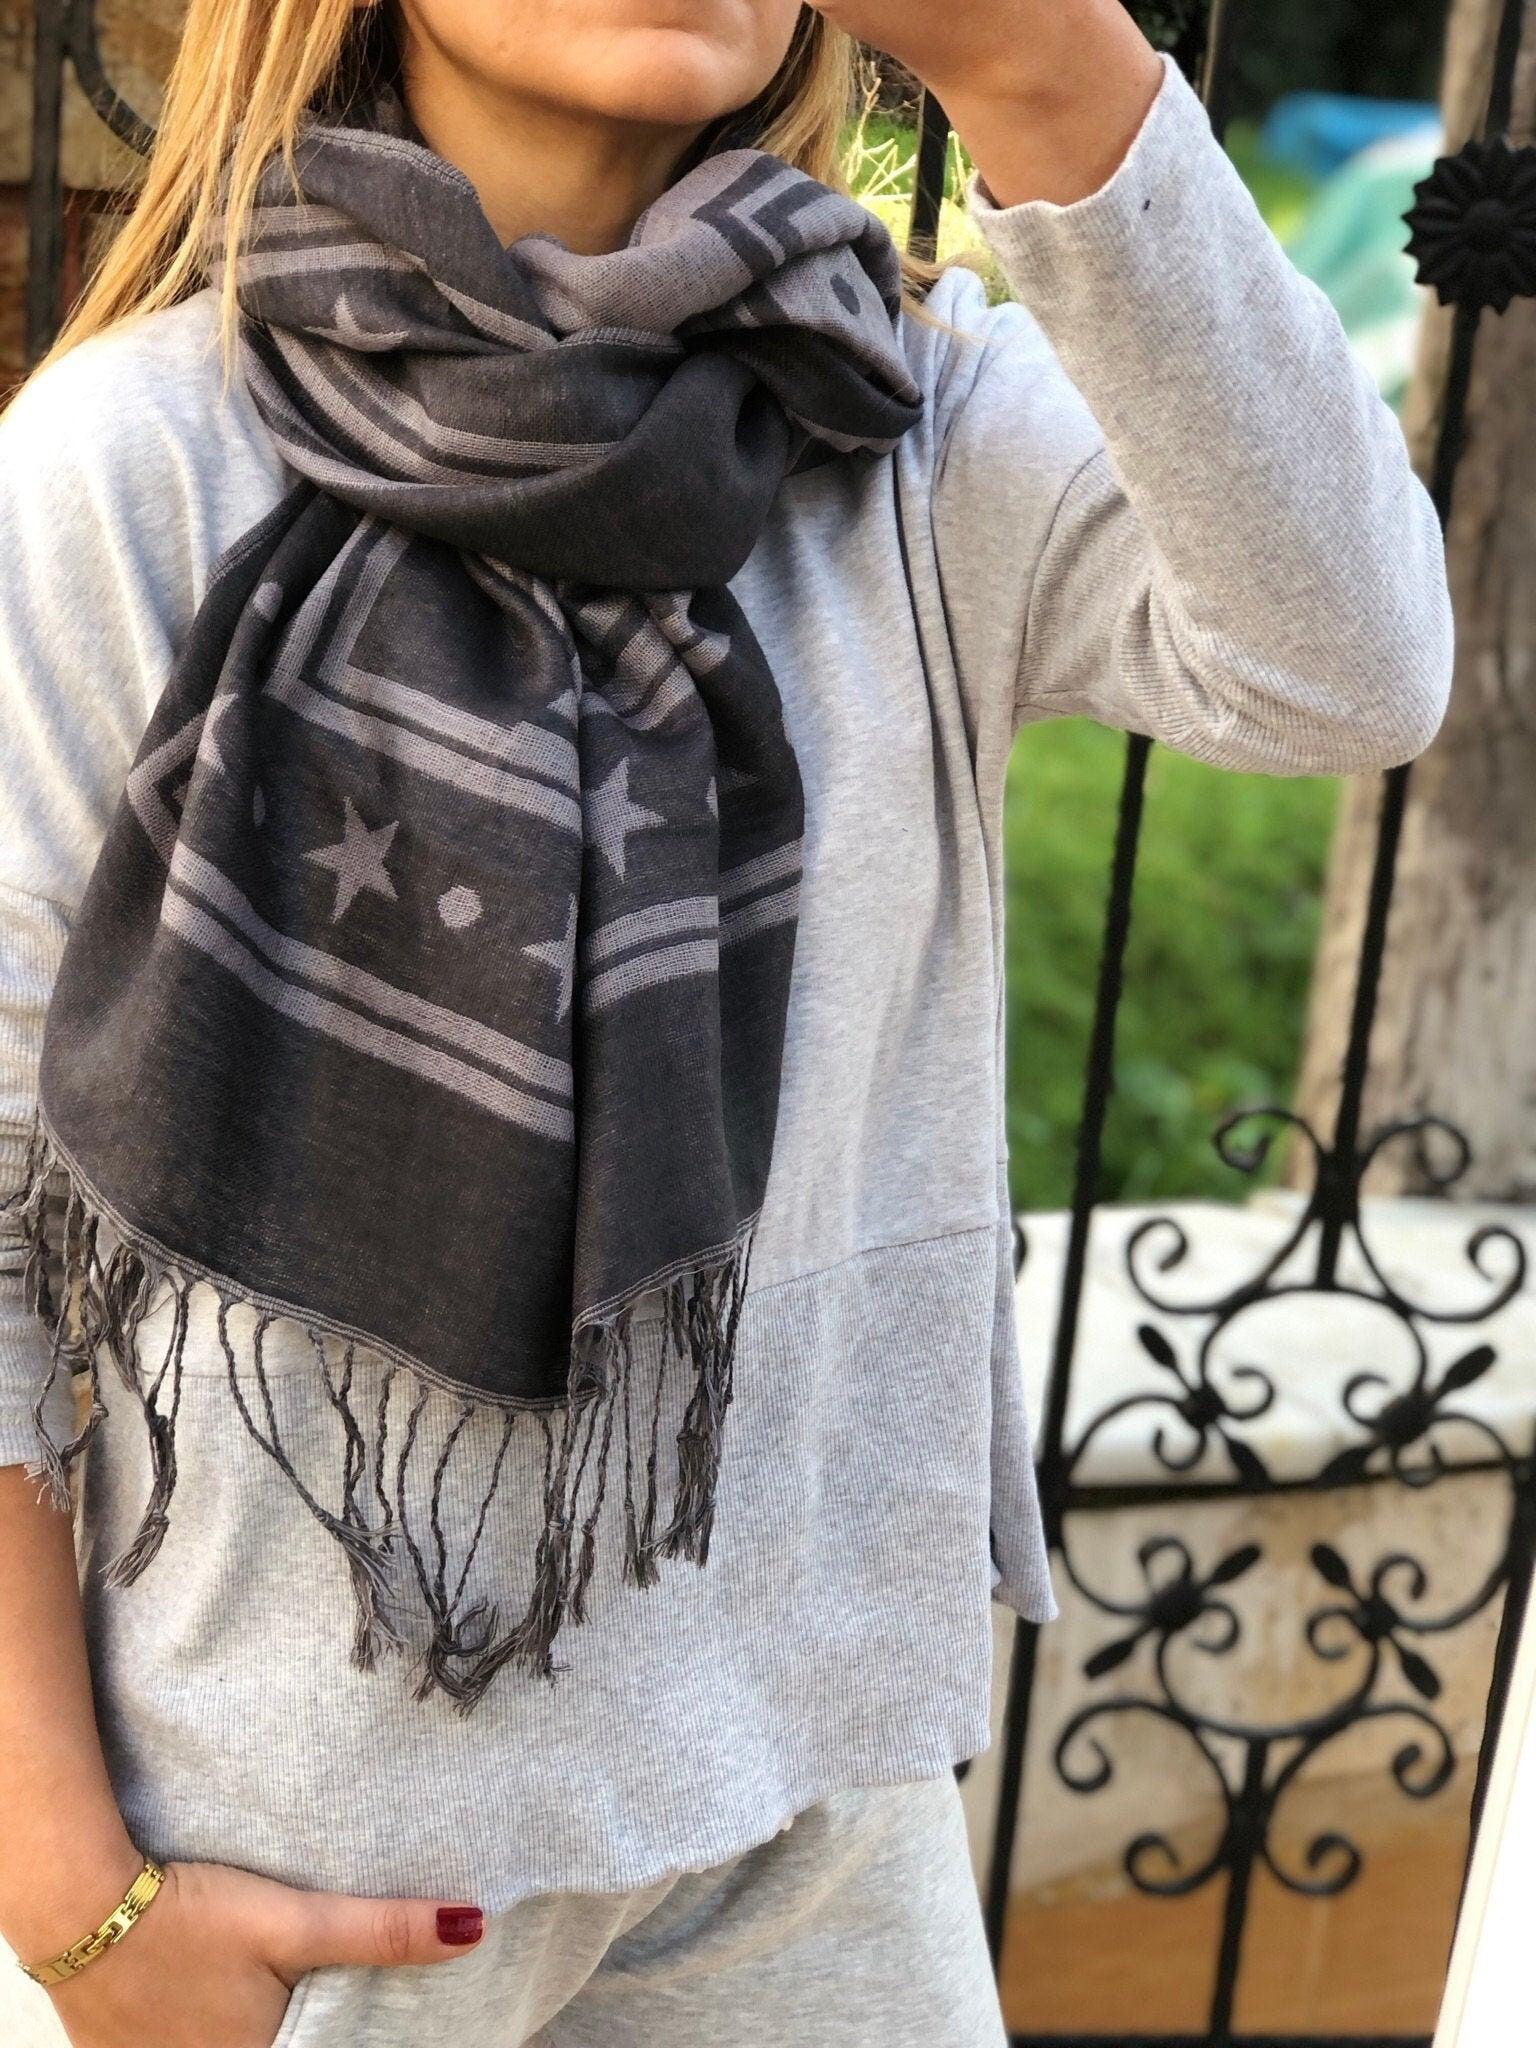 Luxurious Anthracite Gray Acrylic Cotton Scarf - Large Rectangle Scarf with Geometric and Star Pattern - Perfect Gift for Mum available at Moyoni Design